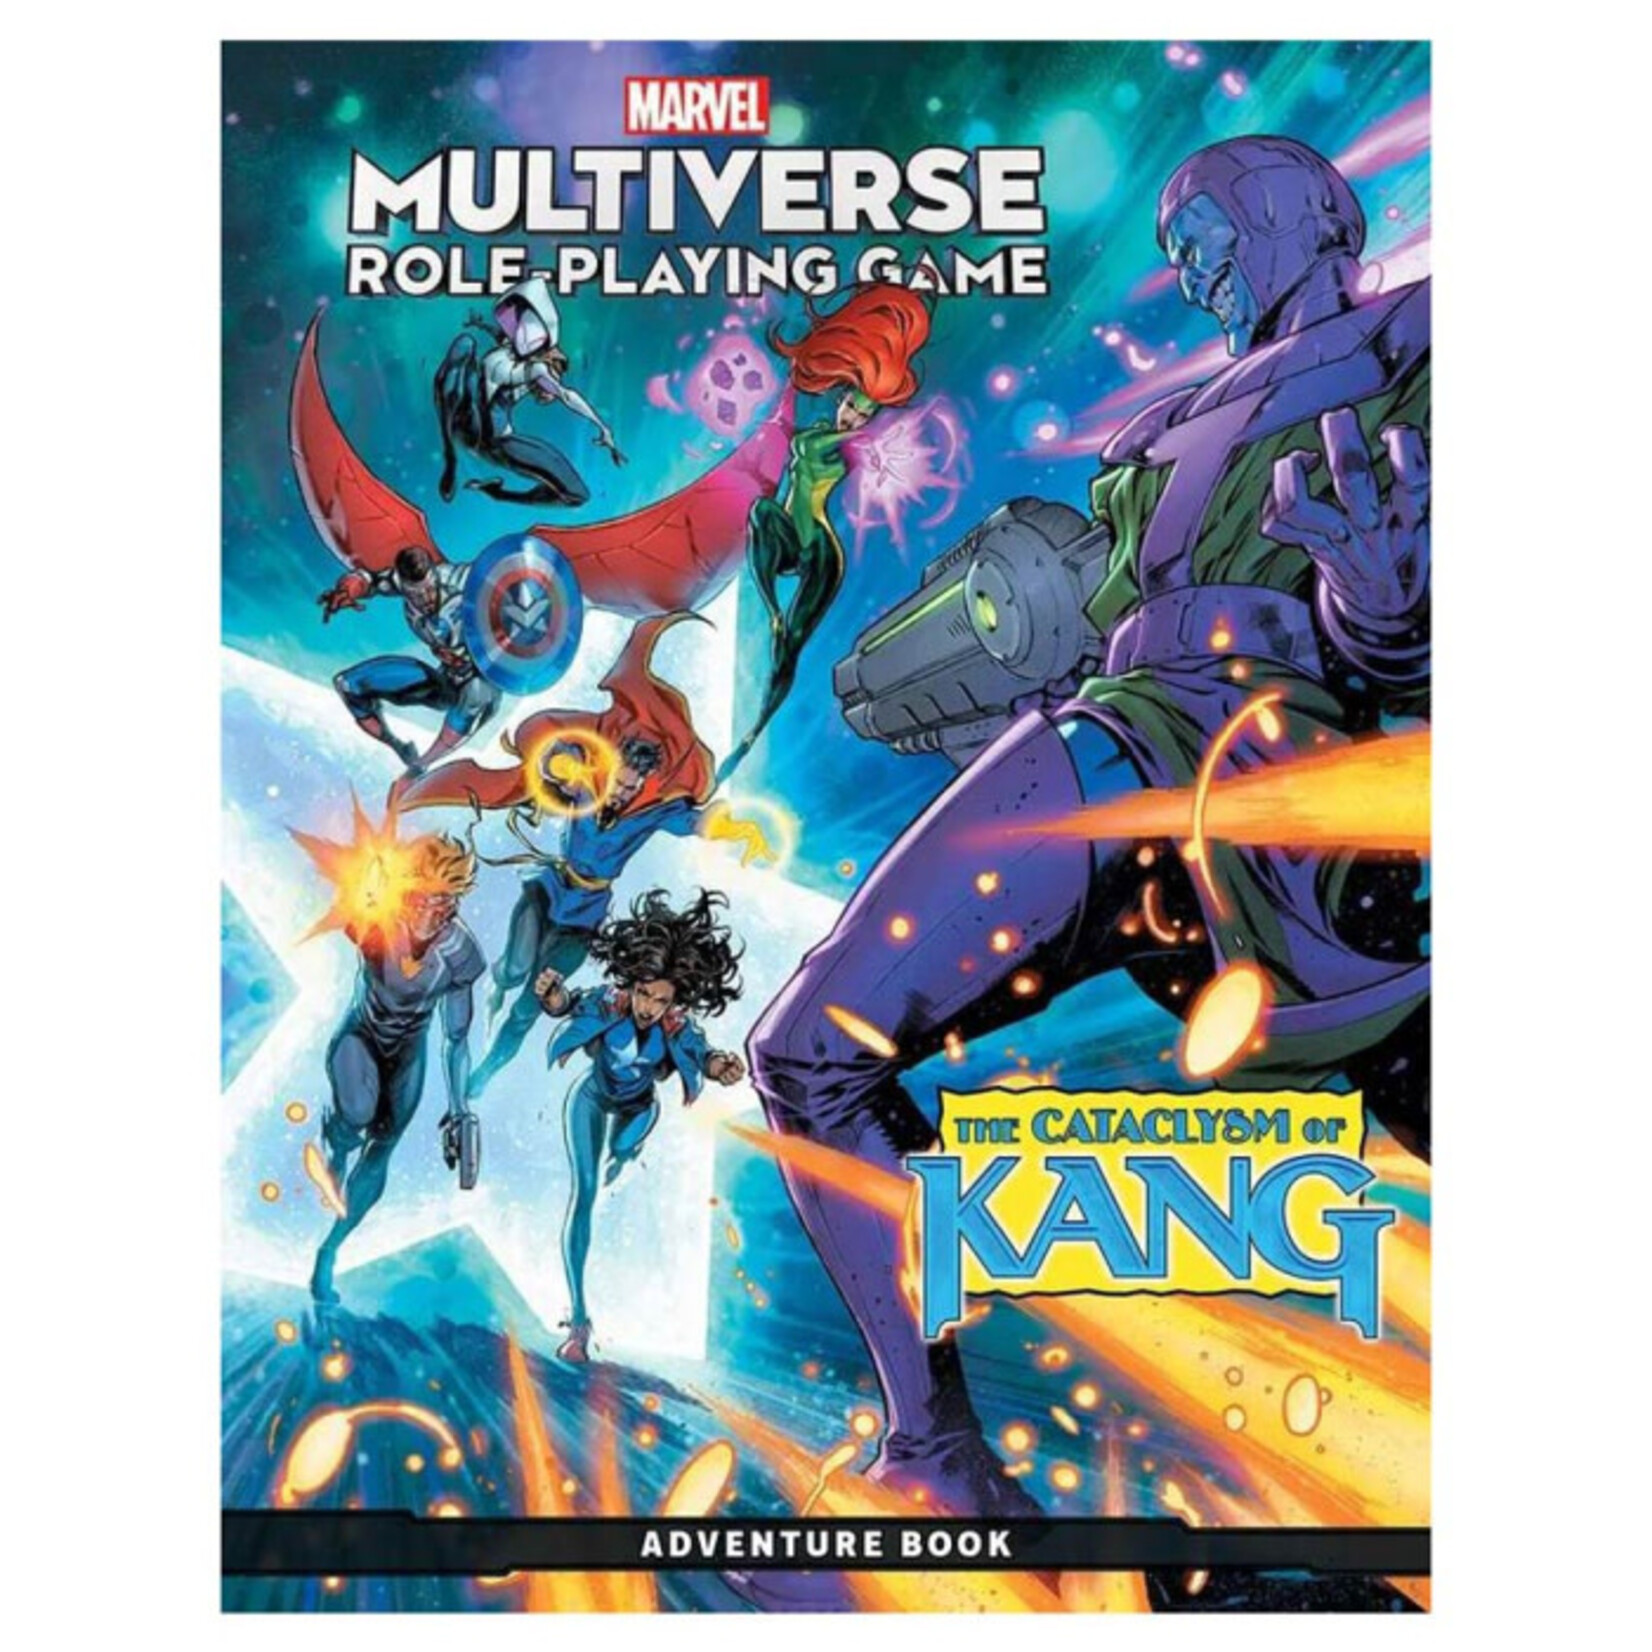 Marvel Marvel Multiverse Role-Playing Game: The Cataclysm of Kang